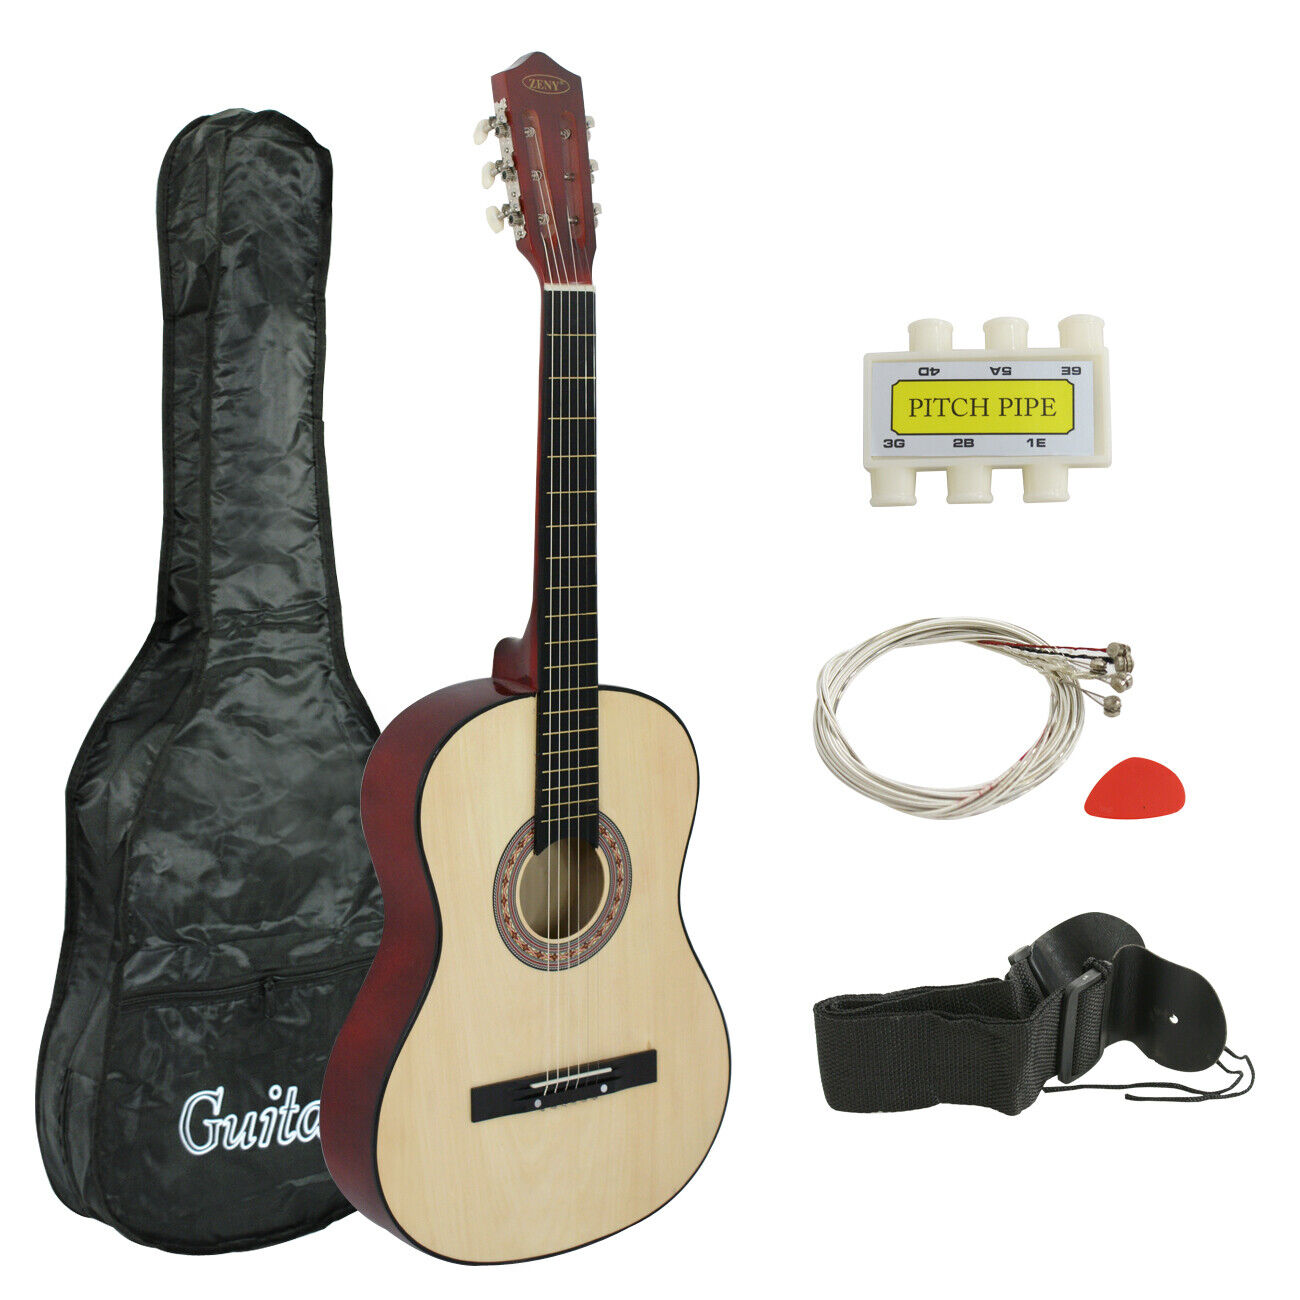 38 Inch Beginners Acoustic Guitar With Guitar Case, Strap, Tuner, Pick Natural